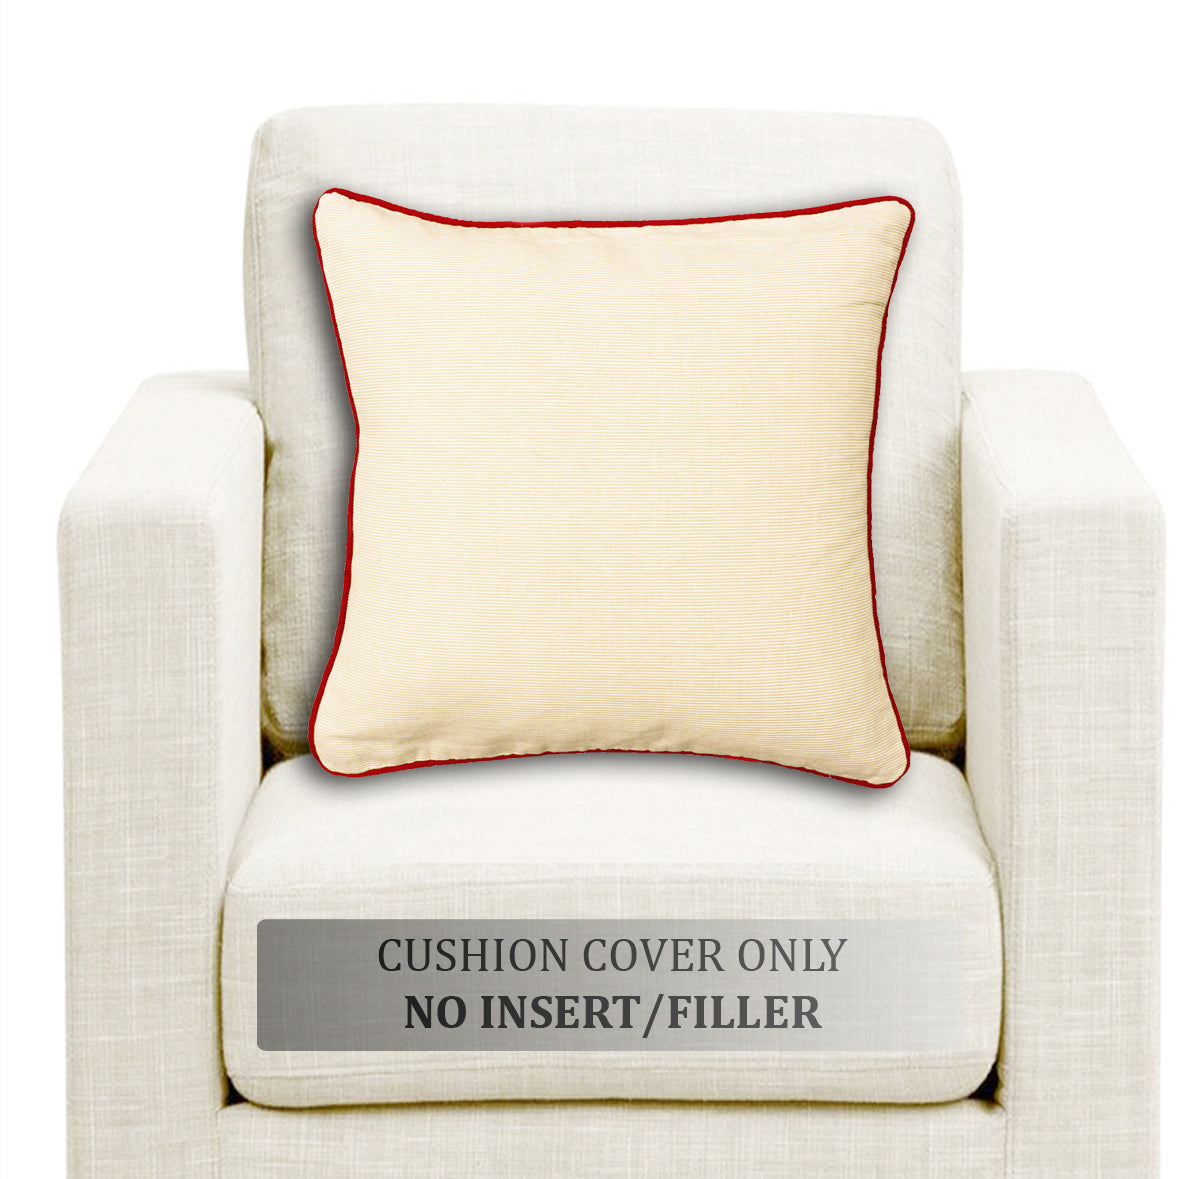 Soft Woven Corded Stripe Cotton Cushion Cover Set in Sand online (1Pc)